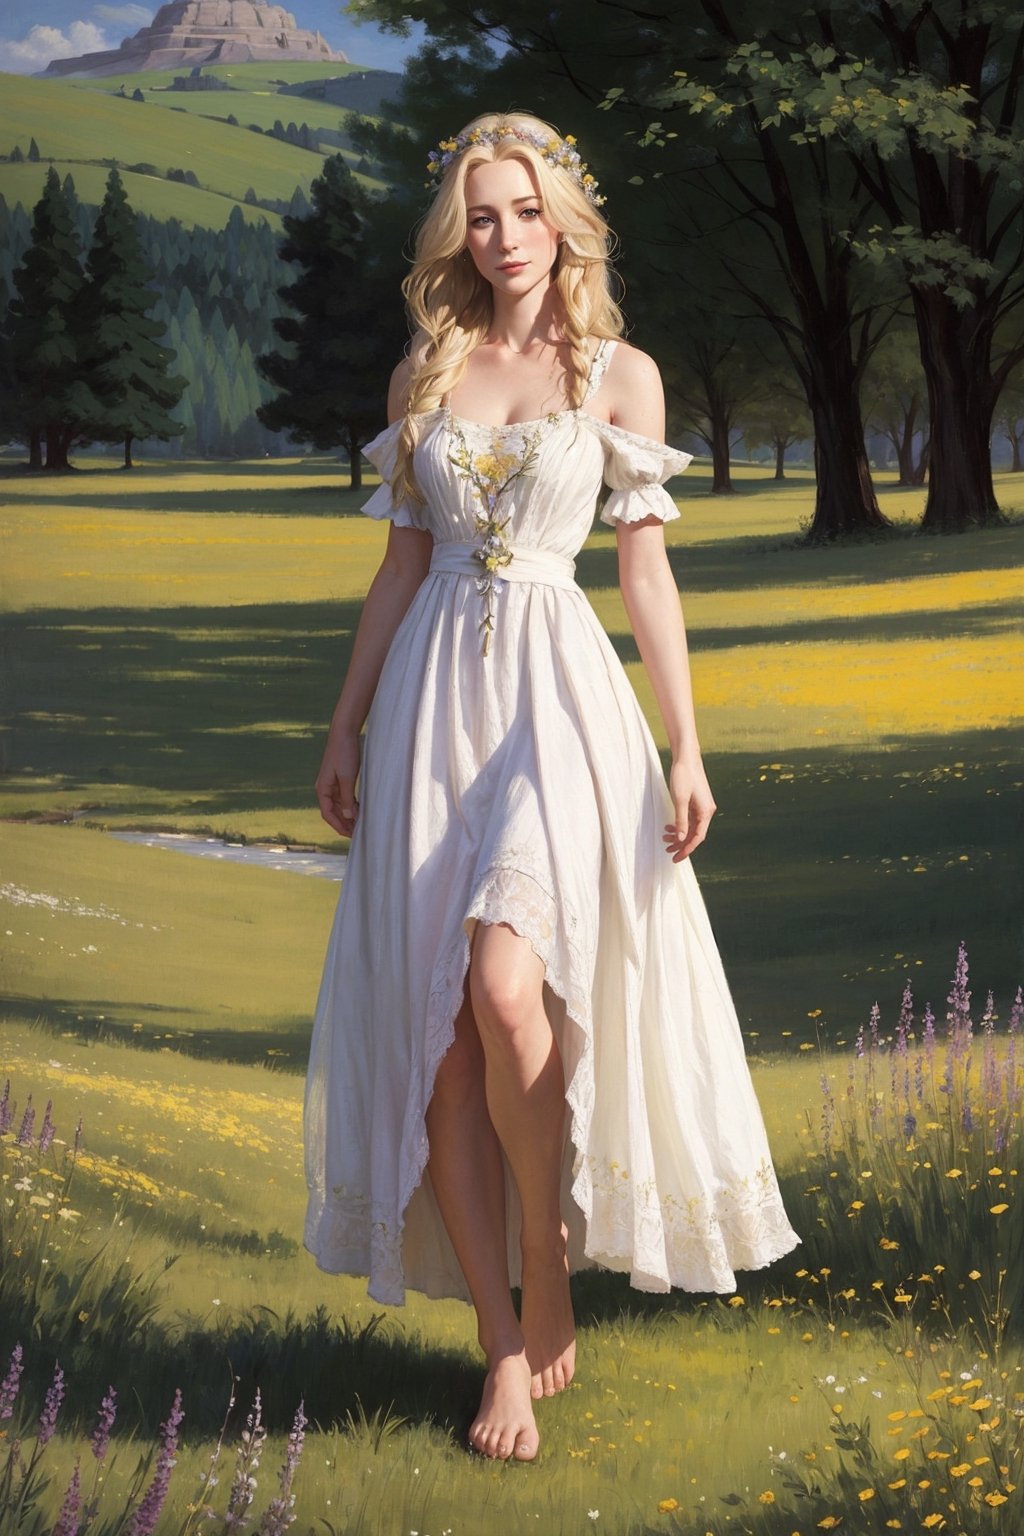 Portrait of a 25-year-old girl with long blonde hair, dressed in a dress made of light material, barefoot, standing in a meadow among flowers,looking at her feet,
 brom's art, depiction of an epic fantasy character, portrait of a character, fantasy art, works by Richard Schmid, A.Mukha, Volegov, impressionism